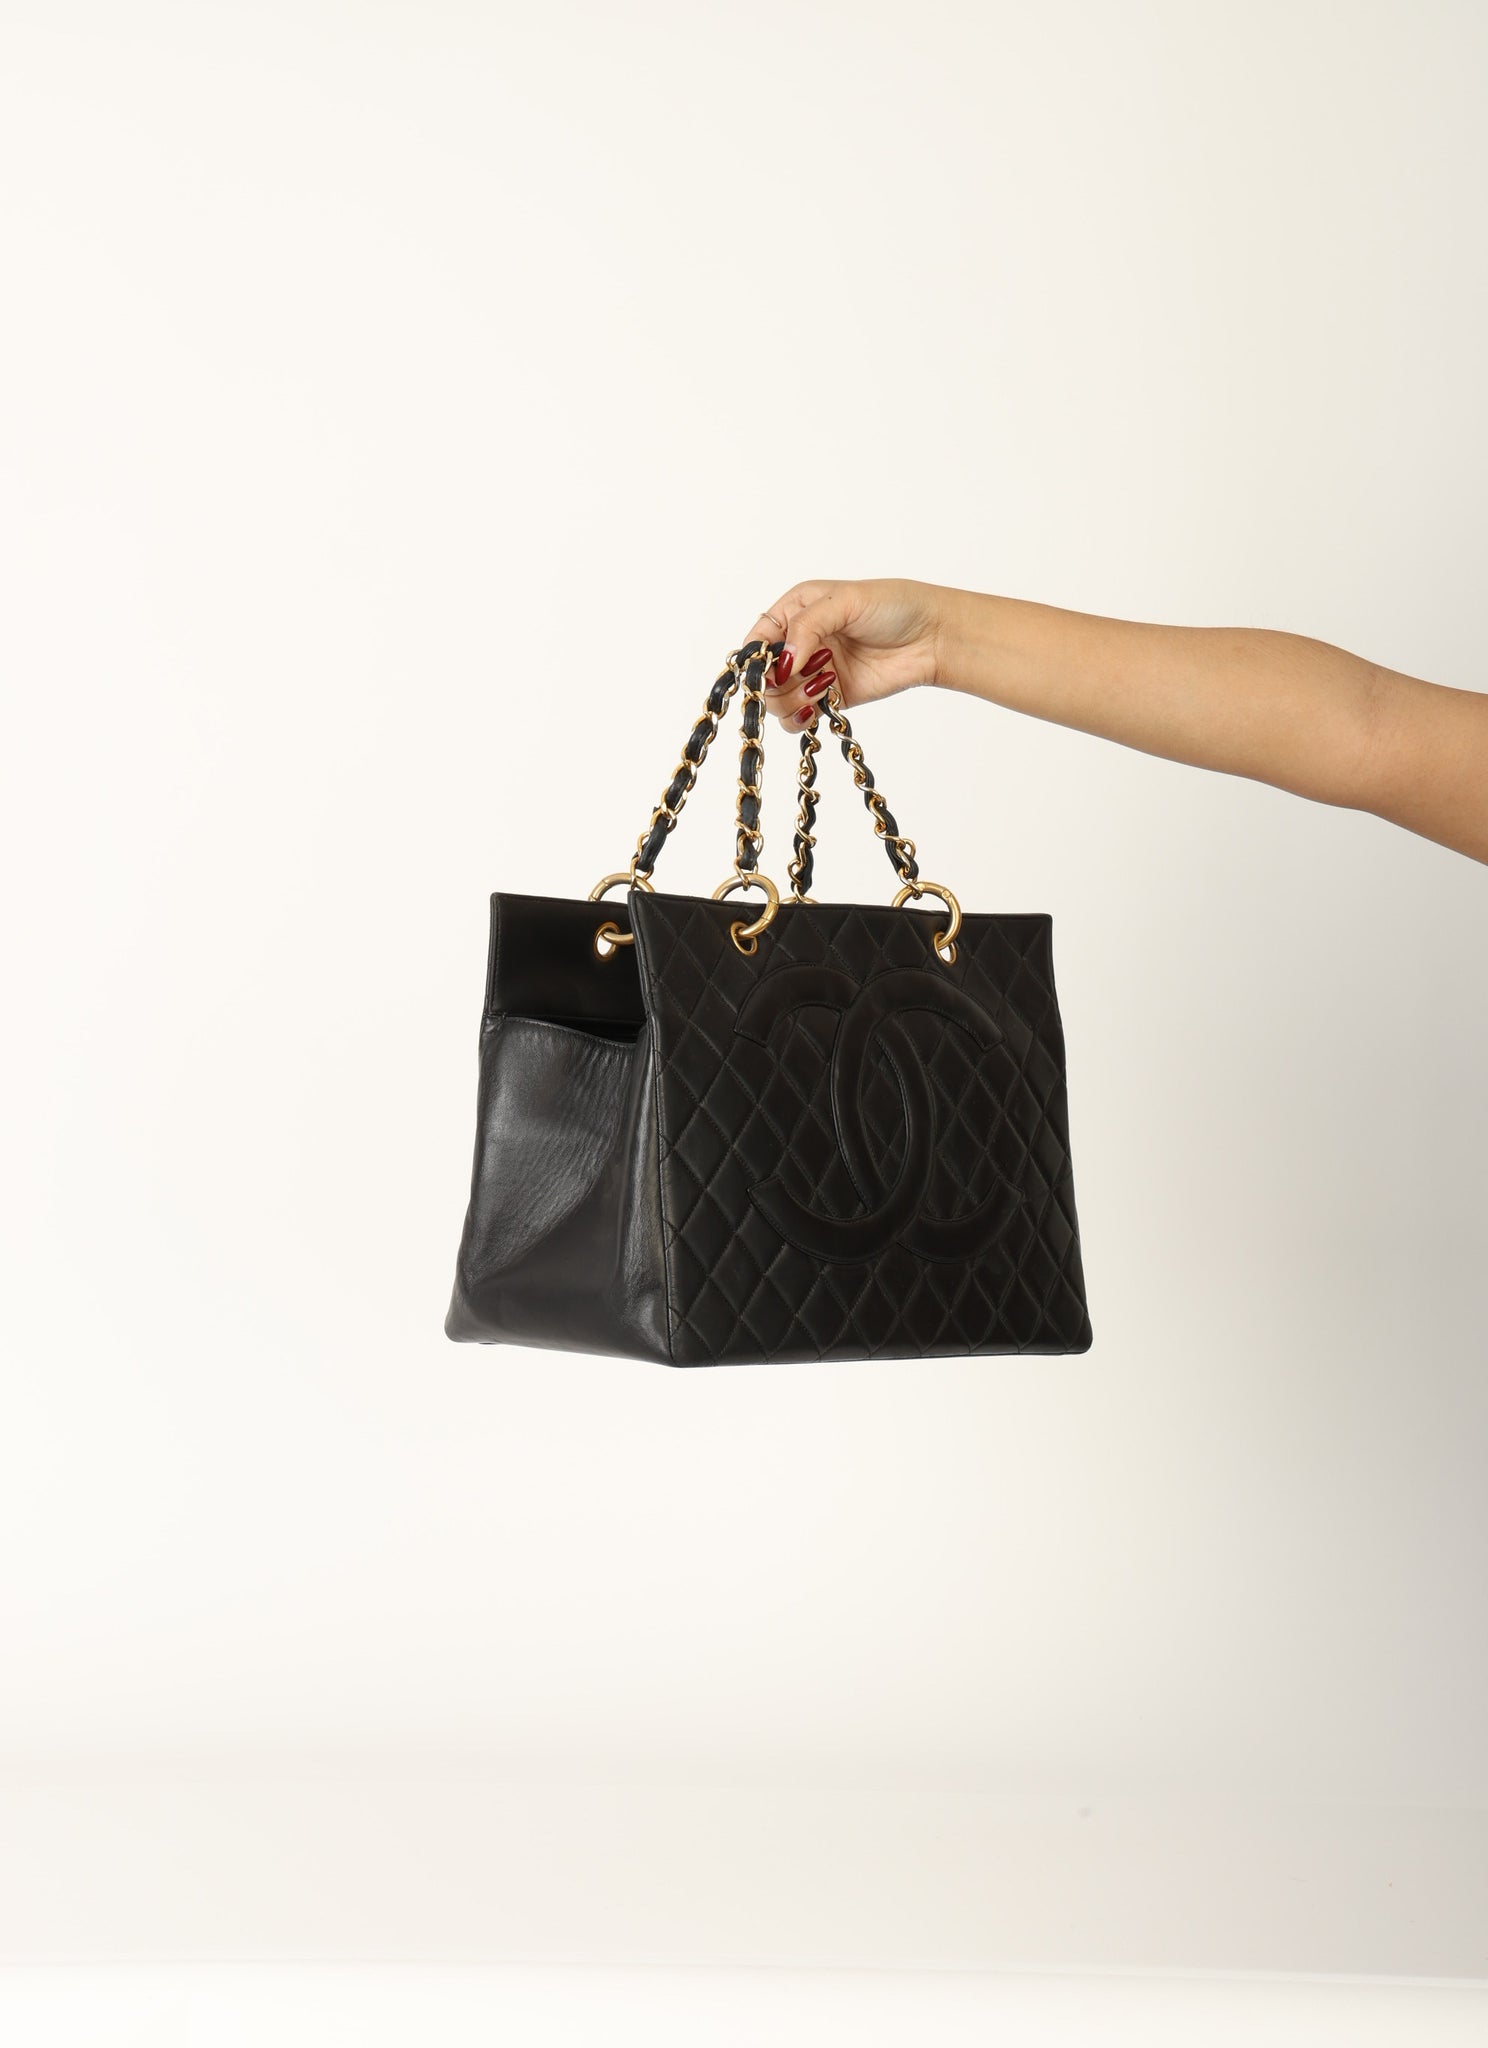 Chanel Lambskin Timeless Chain Tote